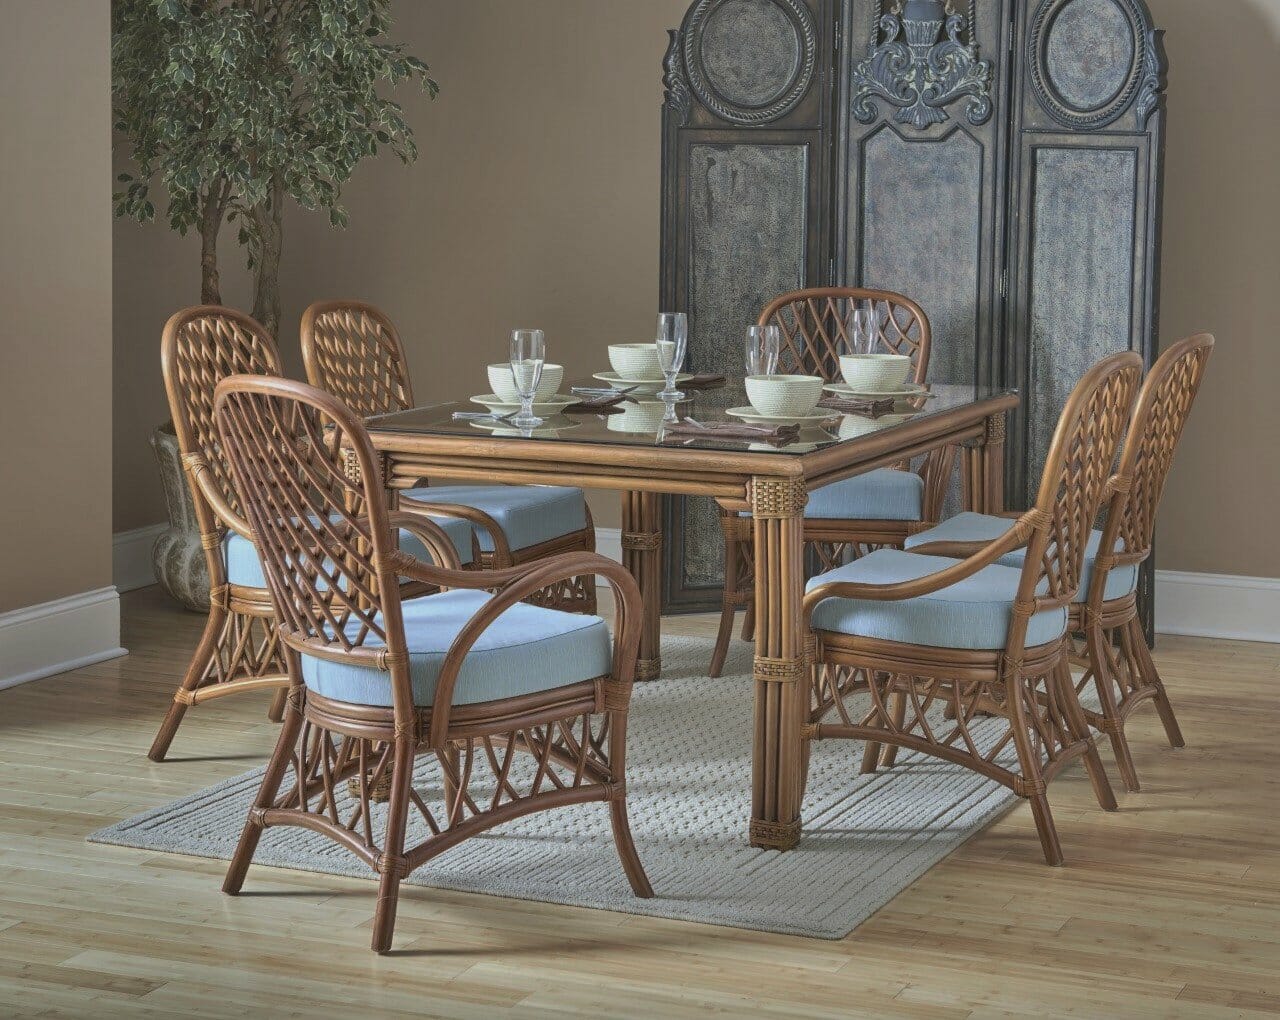 Rattan Dining Room Sets On Clearance